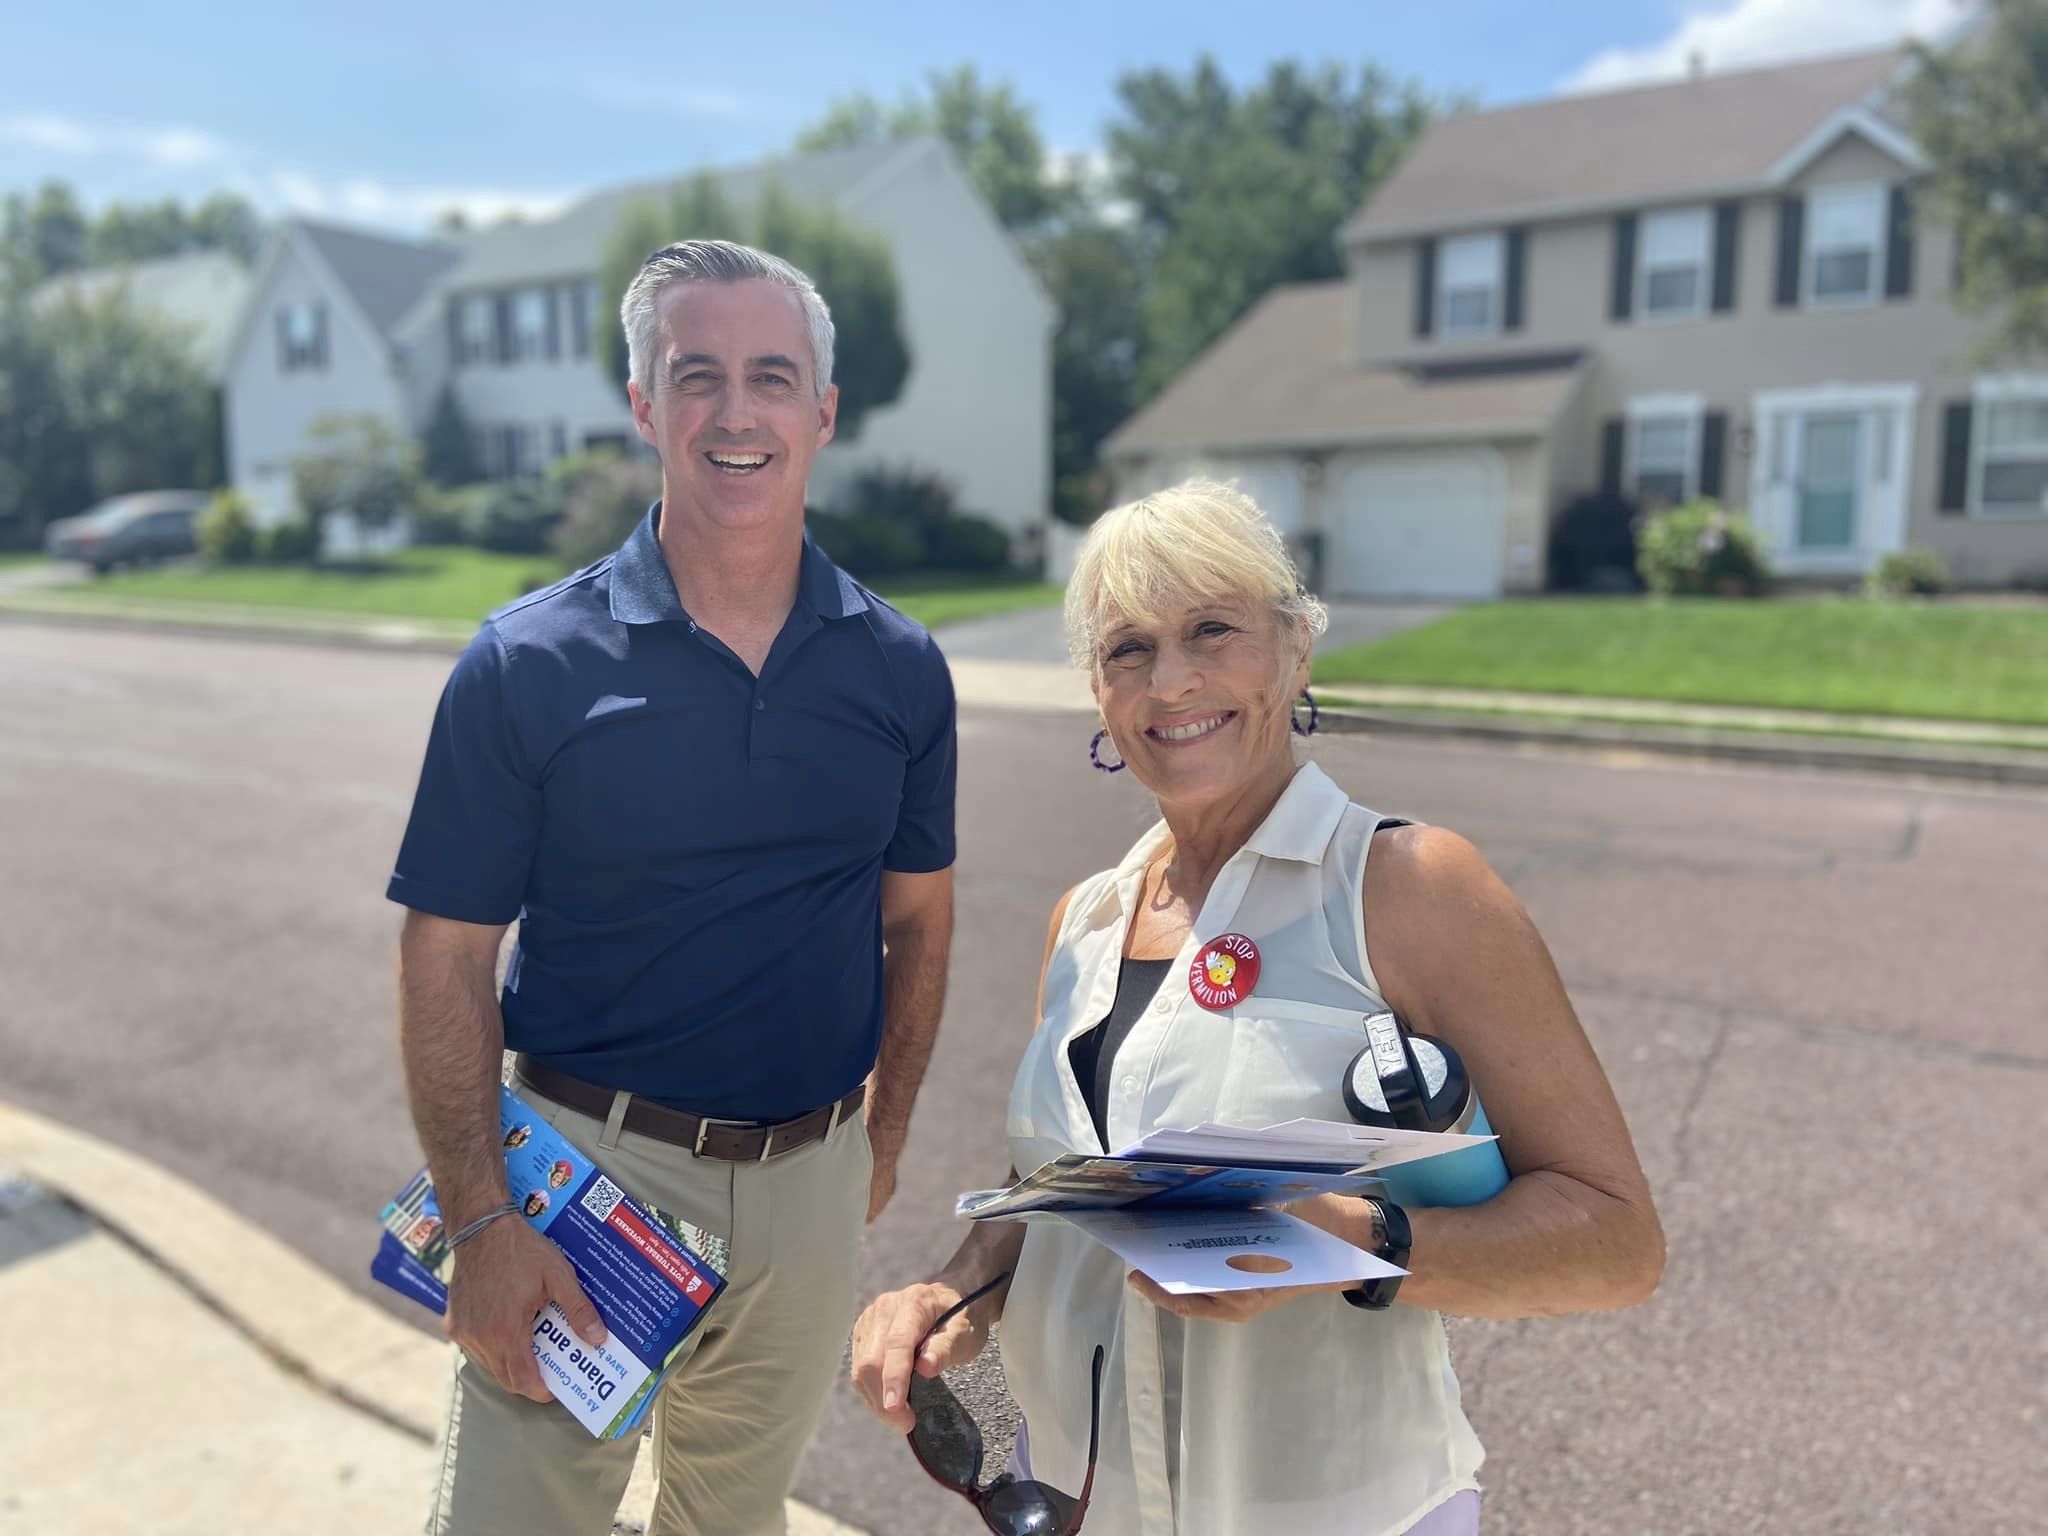 Bob and Diane - Bucks County Beacon - Democratic Bucks County Commissioners Are Running on Their Record of Accomplishments and Bipartisanship